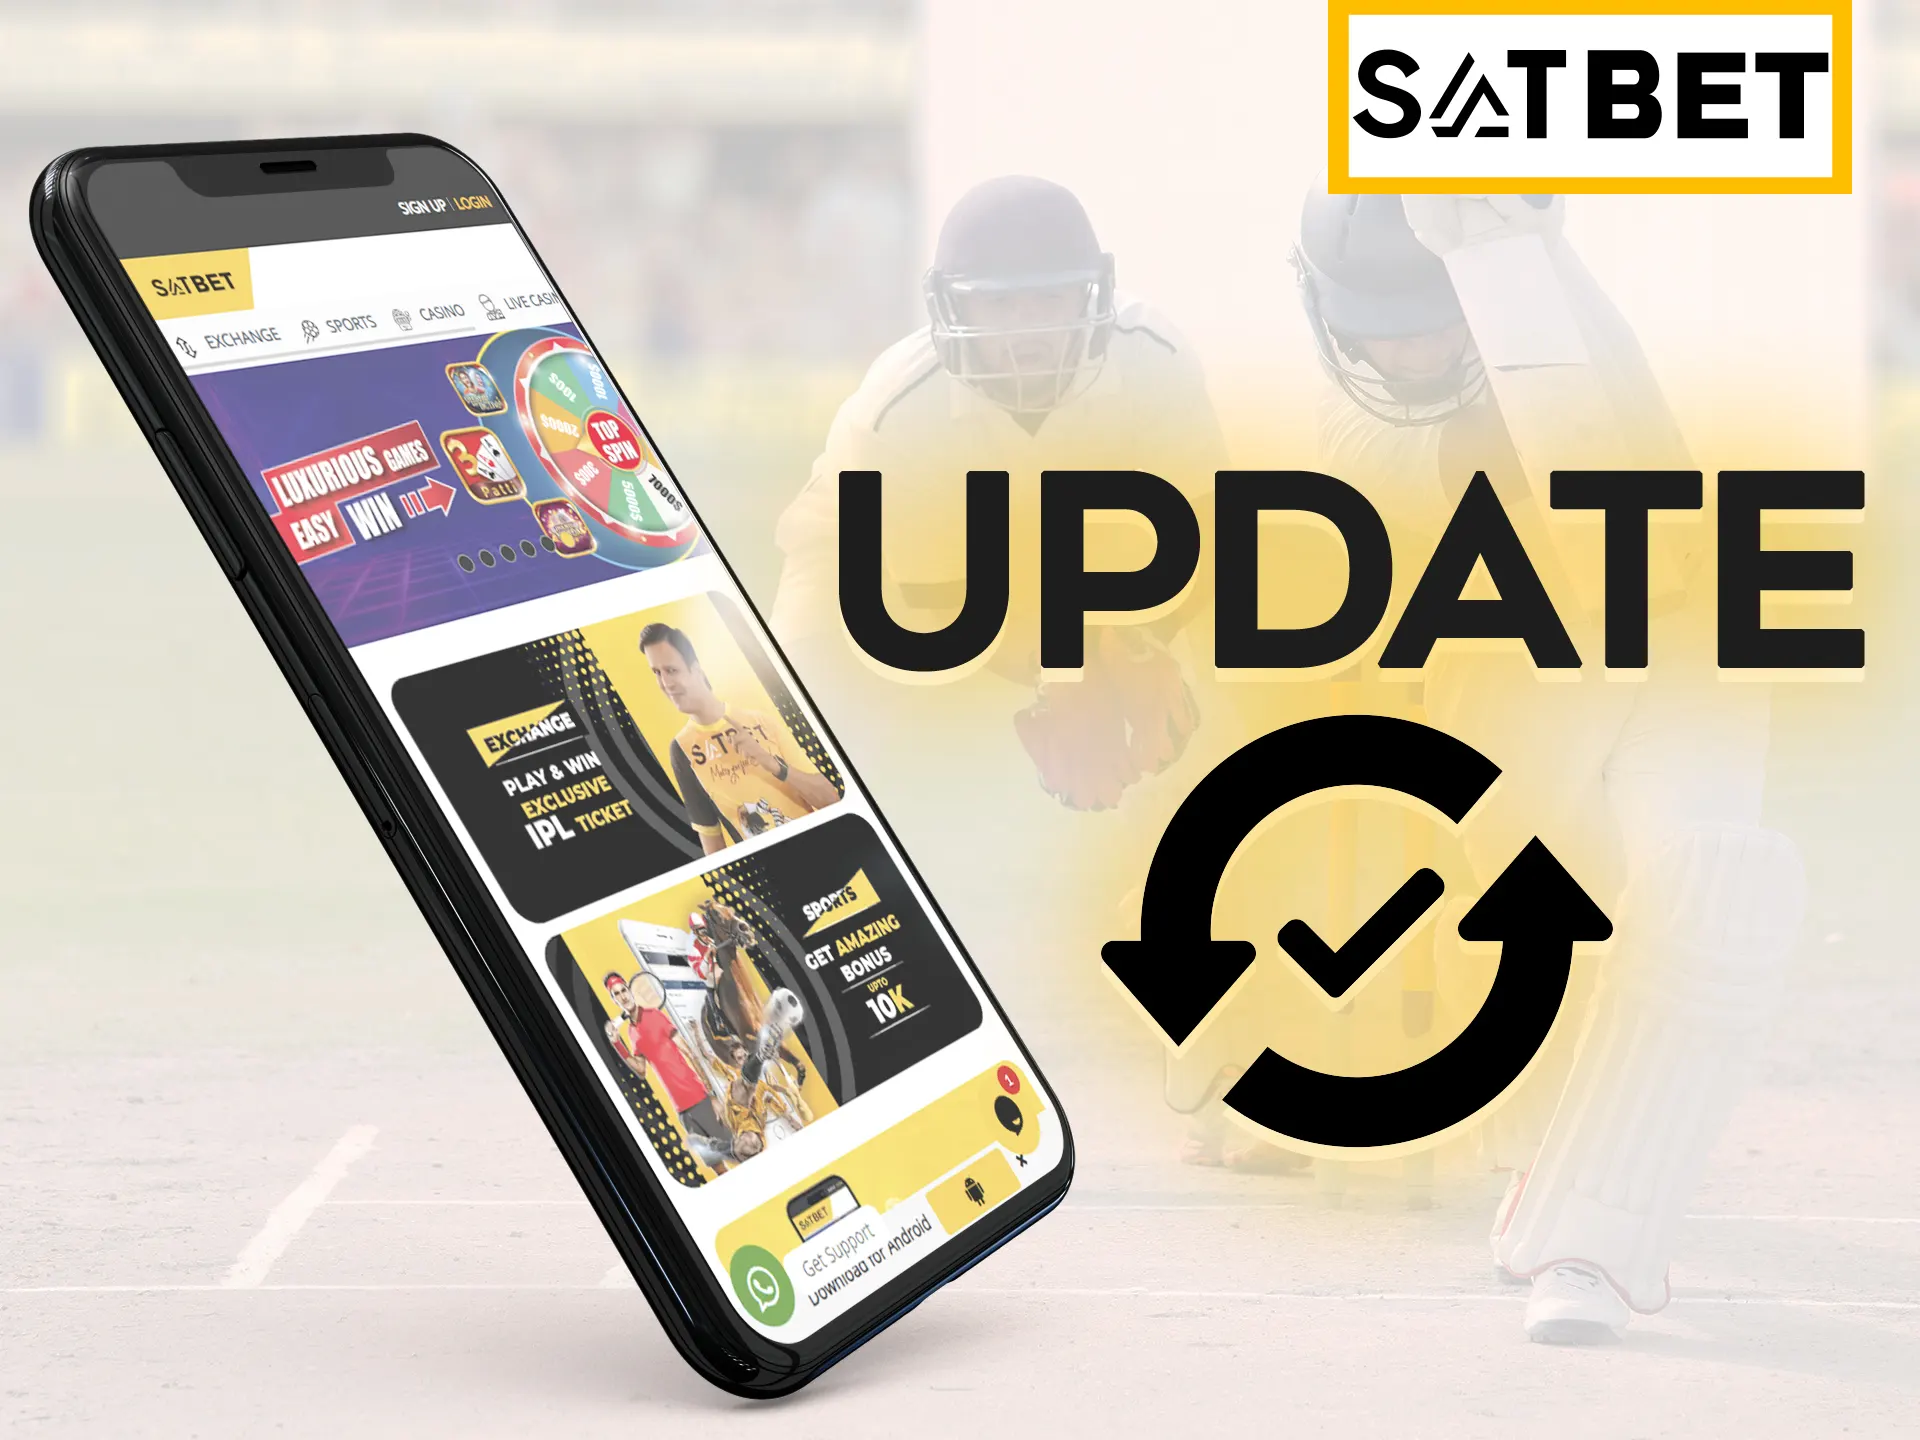 Satbet app updates automatically after starting the app.